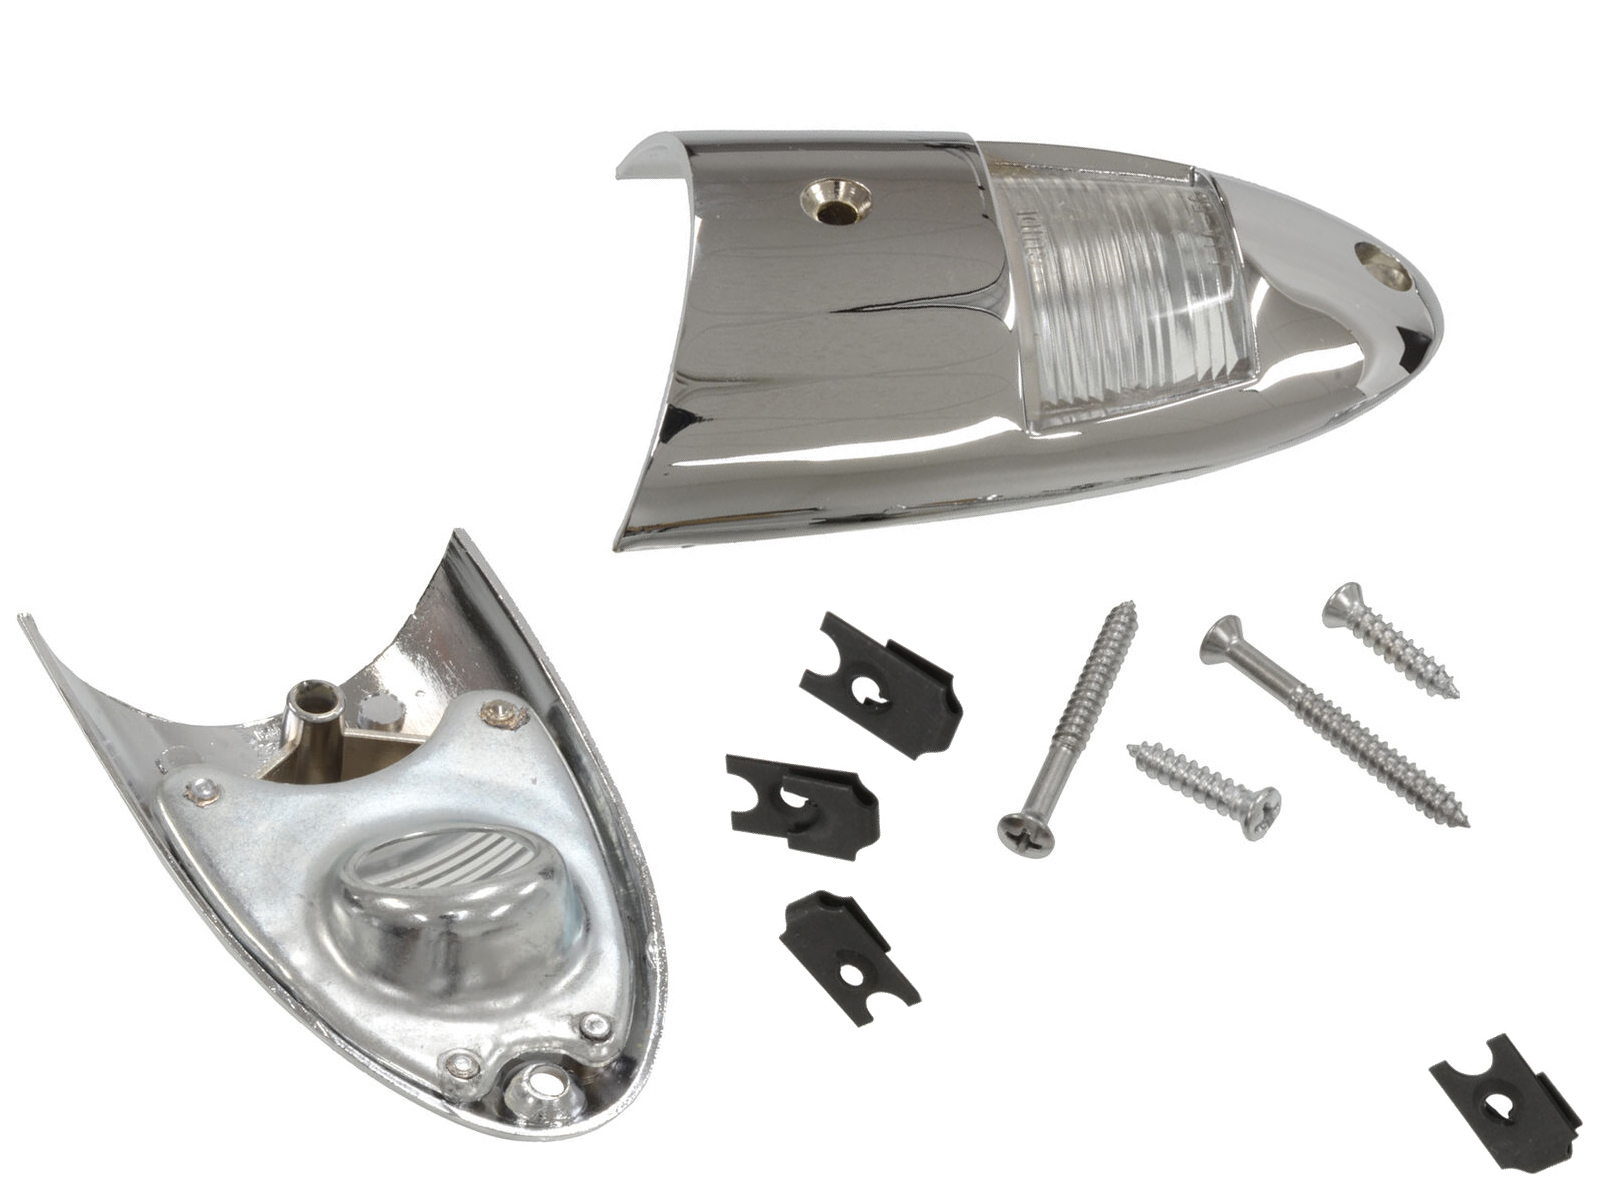 Corvette License Light Assembly with Fasteners